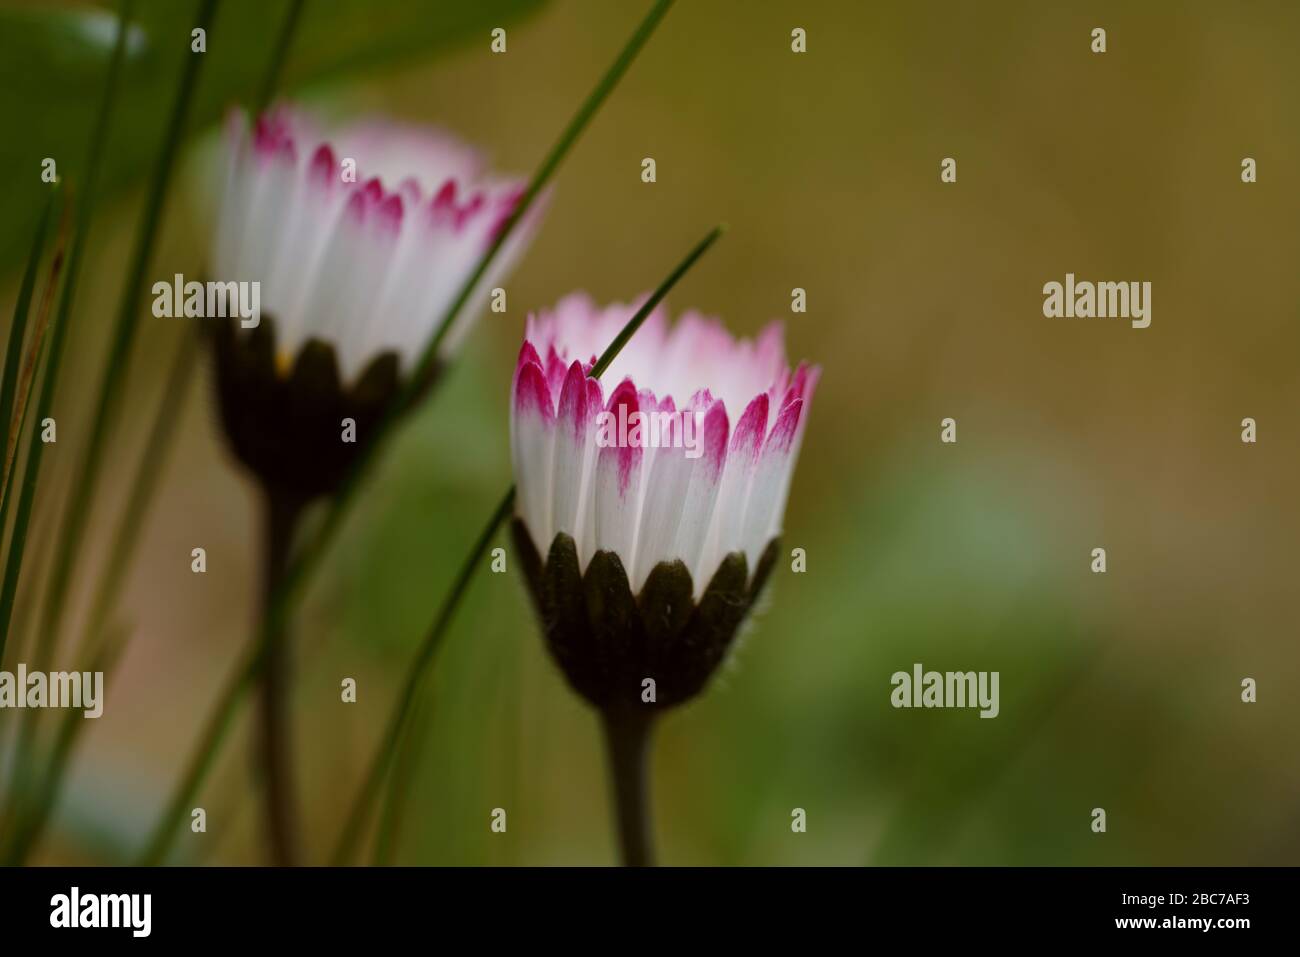 Close up of pink flowering plants - daisy Stock Photo